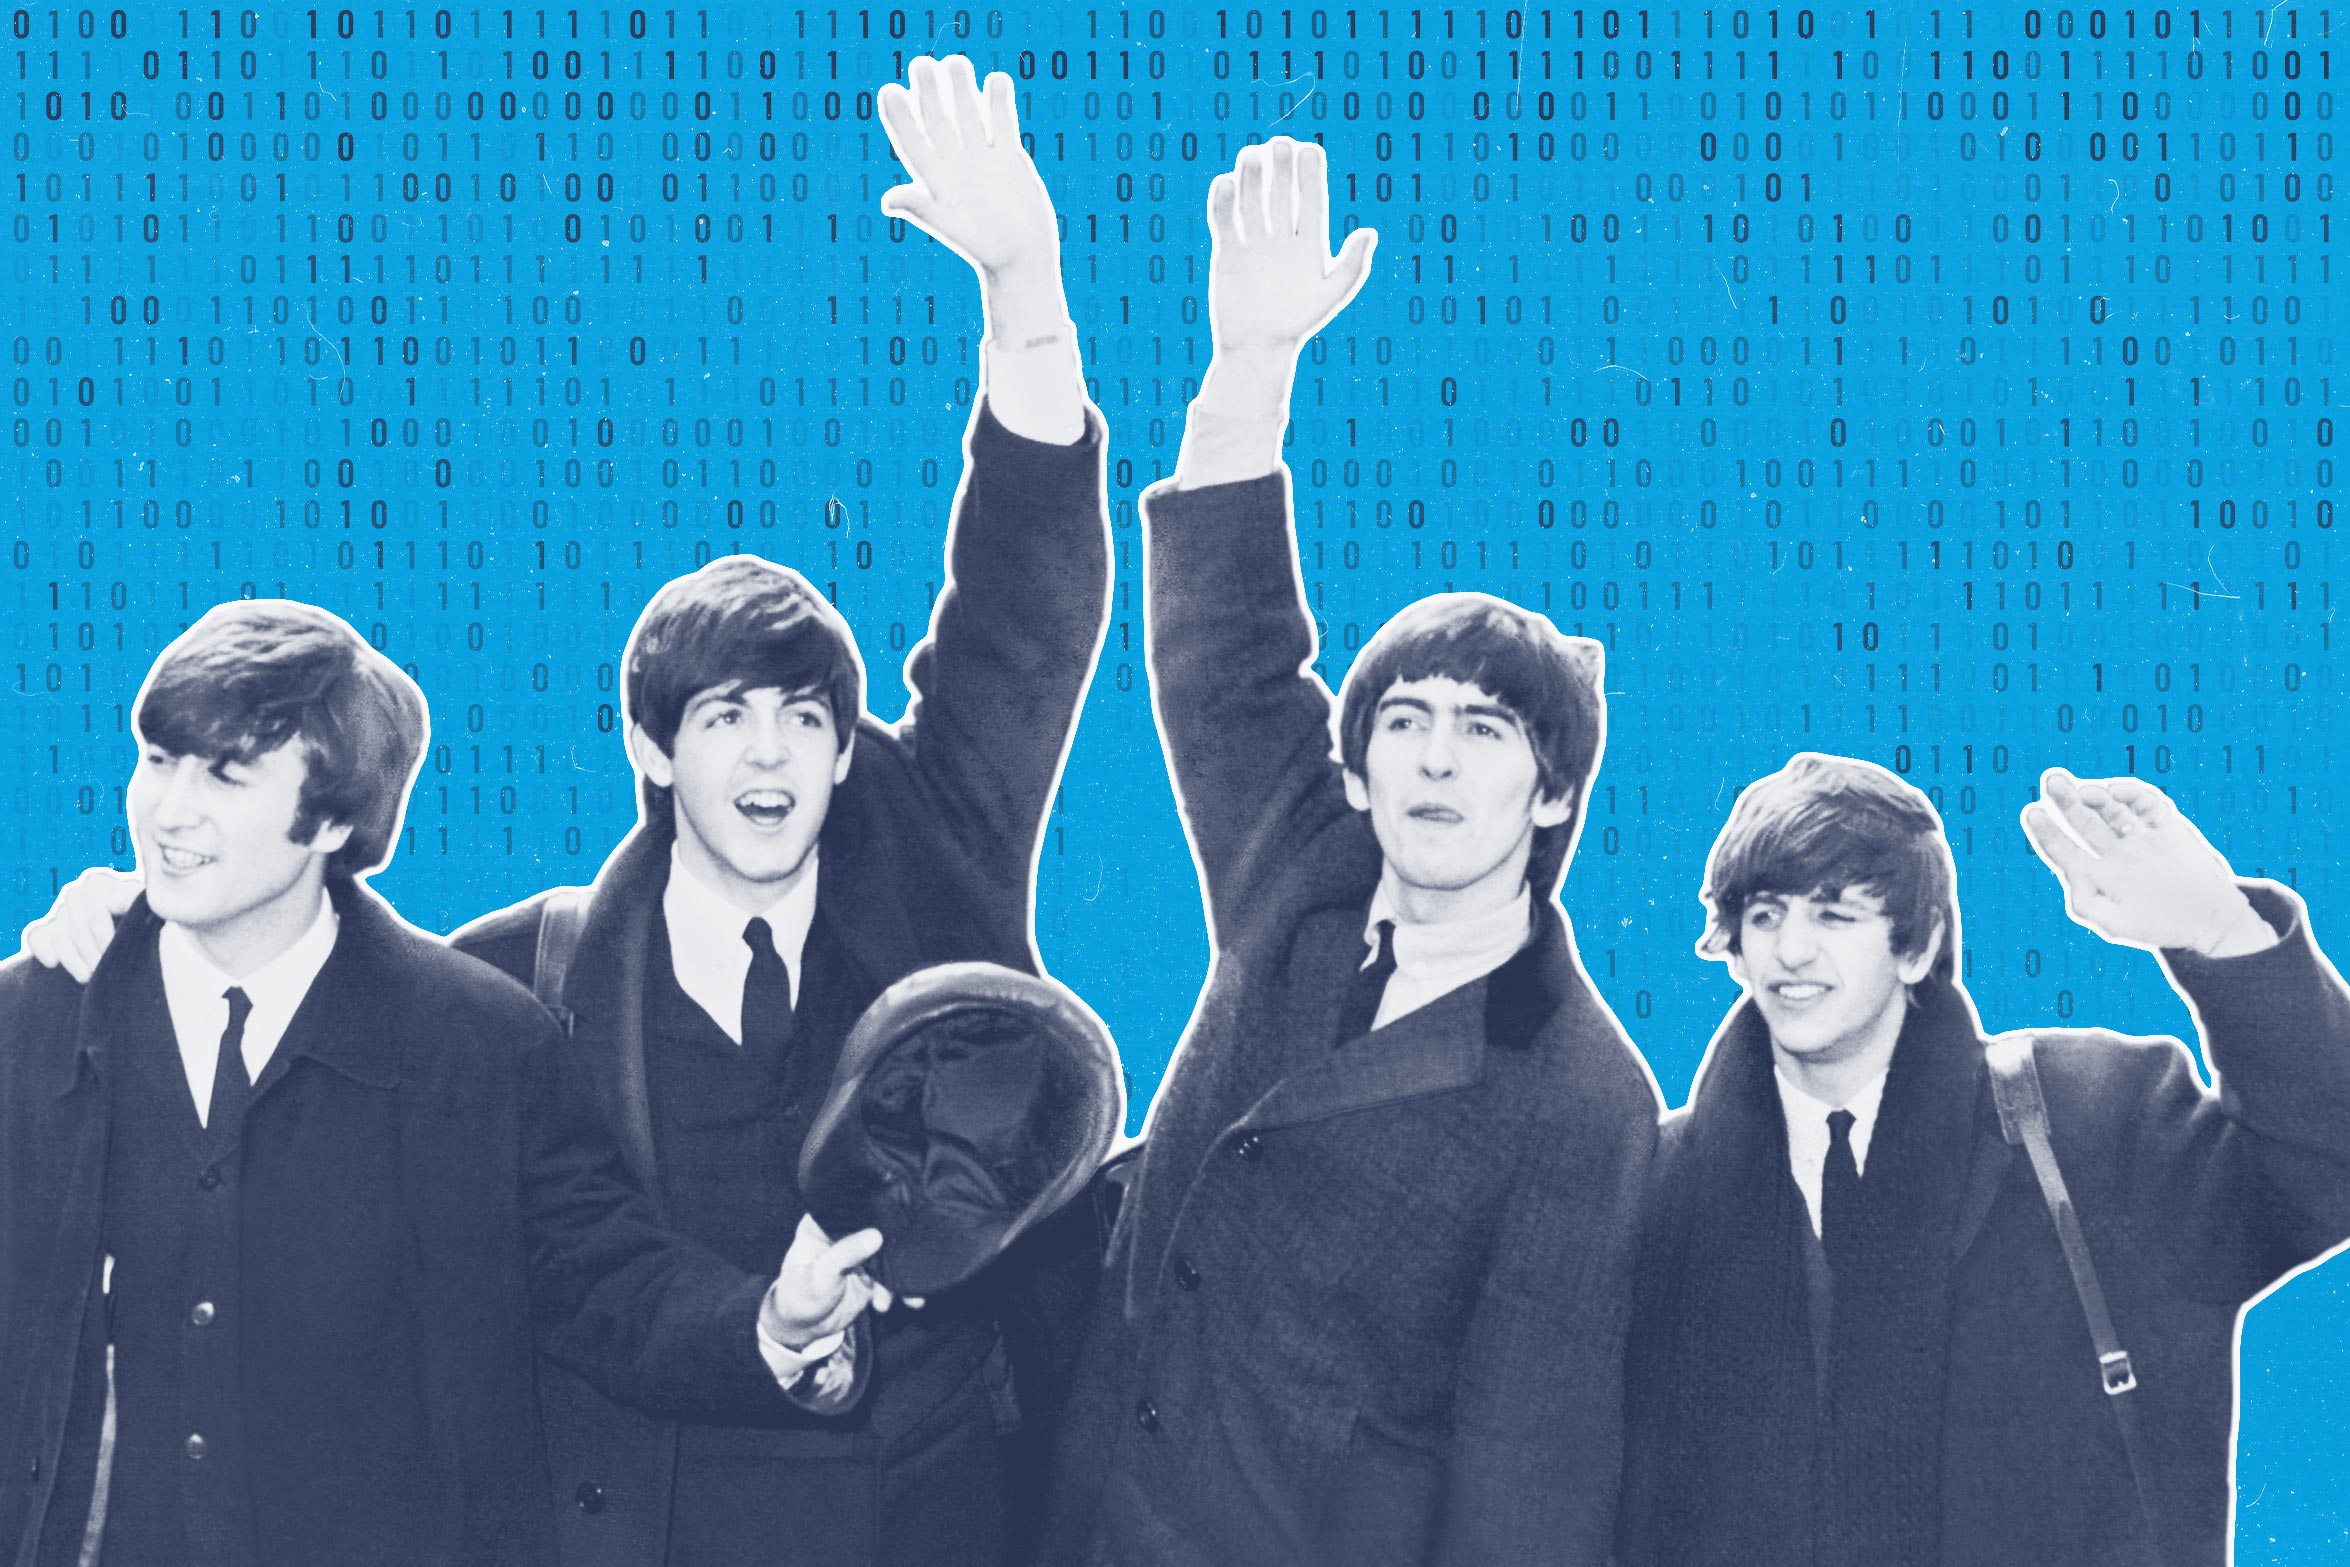 The four members of The Beatles wave and smile in black-and-white laid over top of a blue background made of binary code.